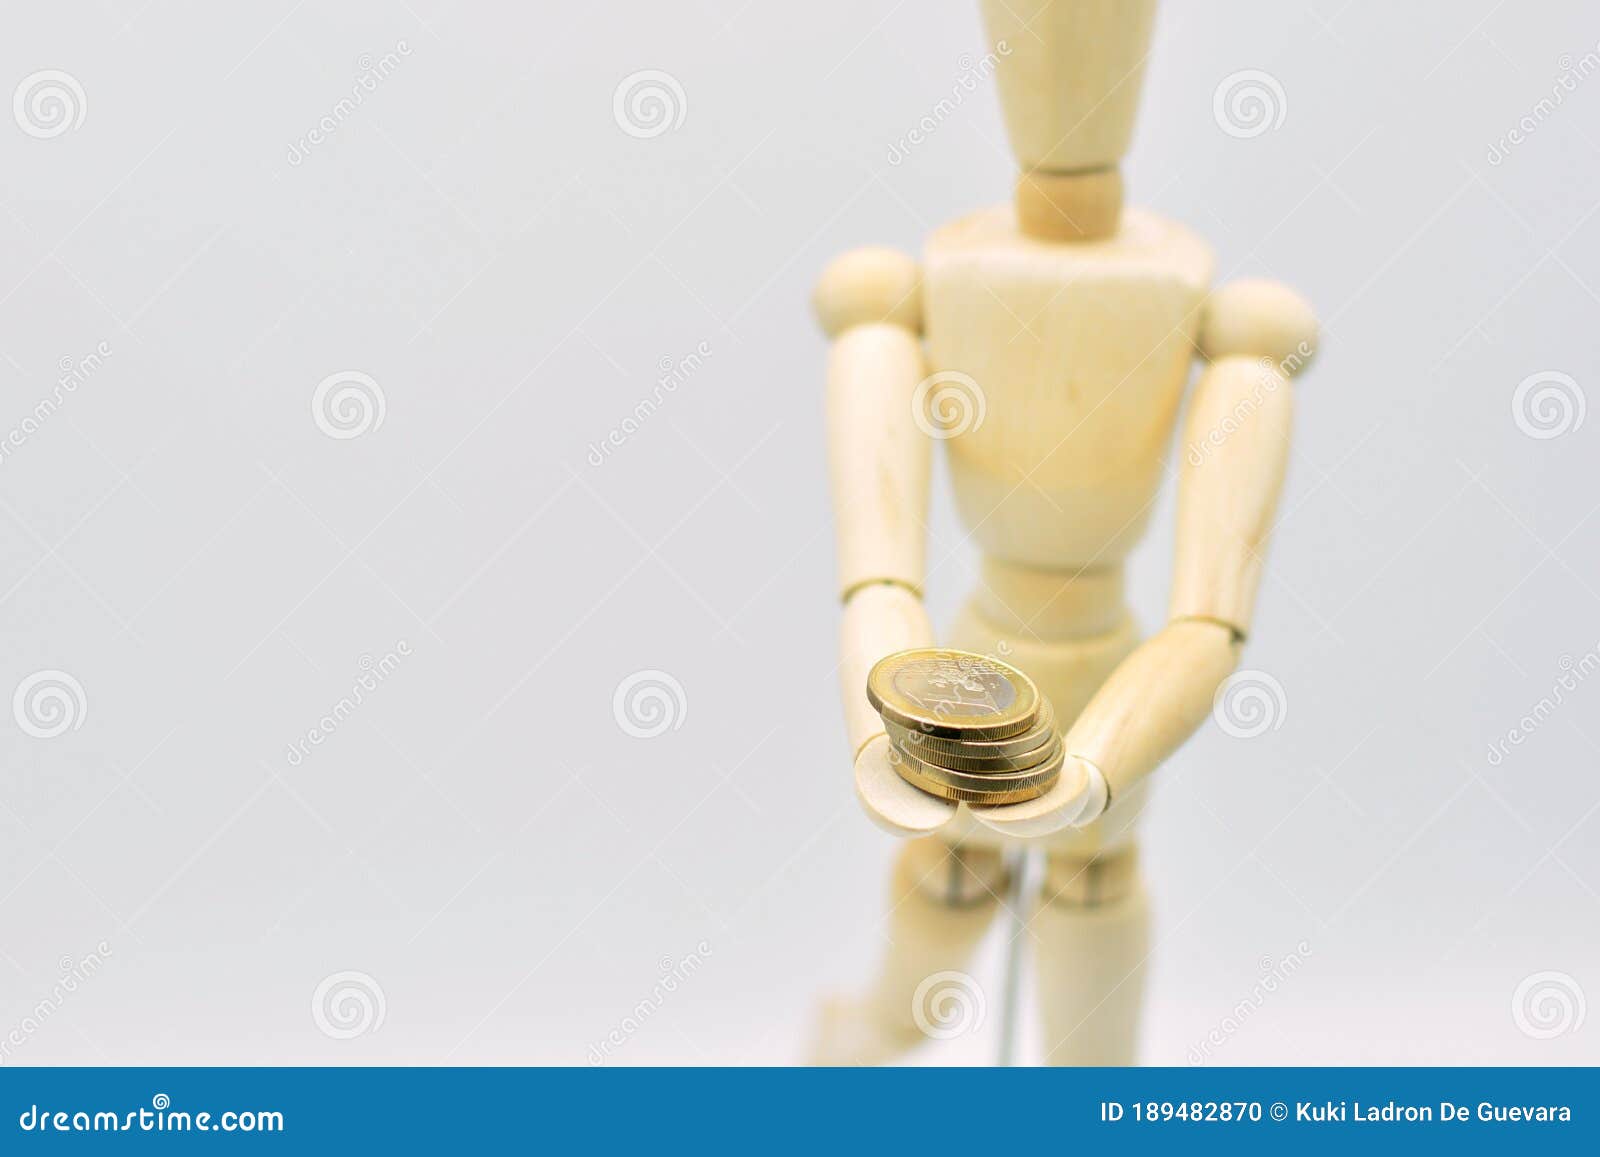 wooden mannequin with coins